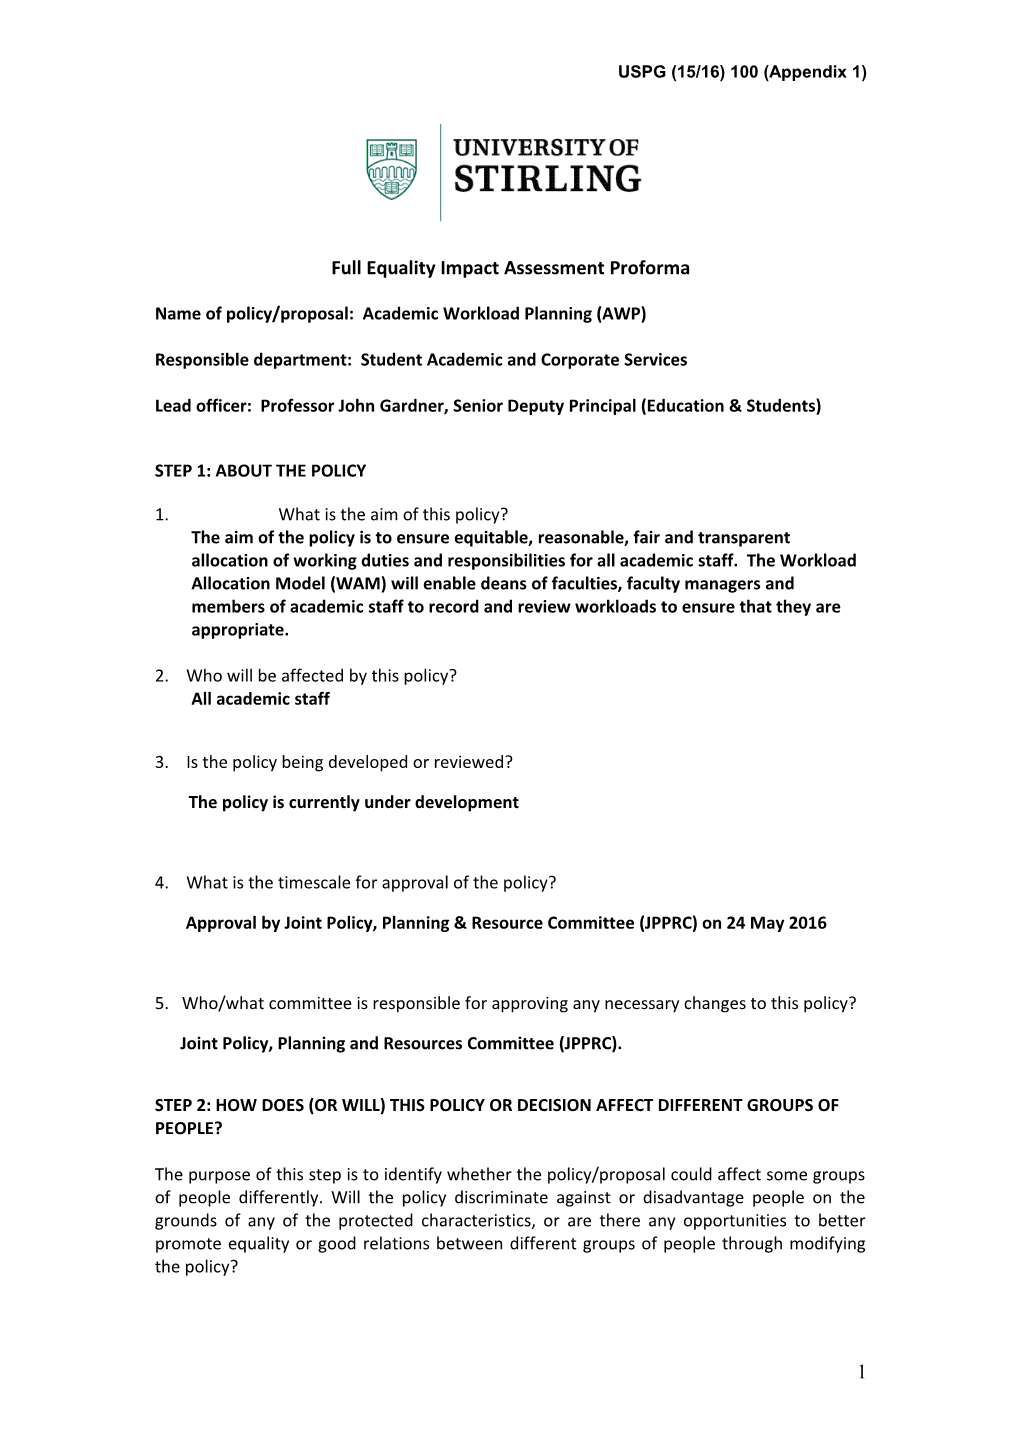 Full Equality Impact Assessment Proforma